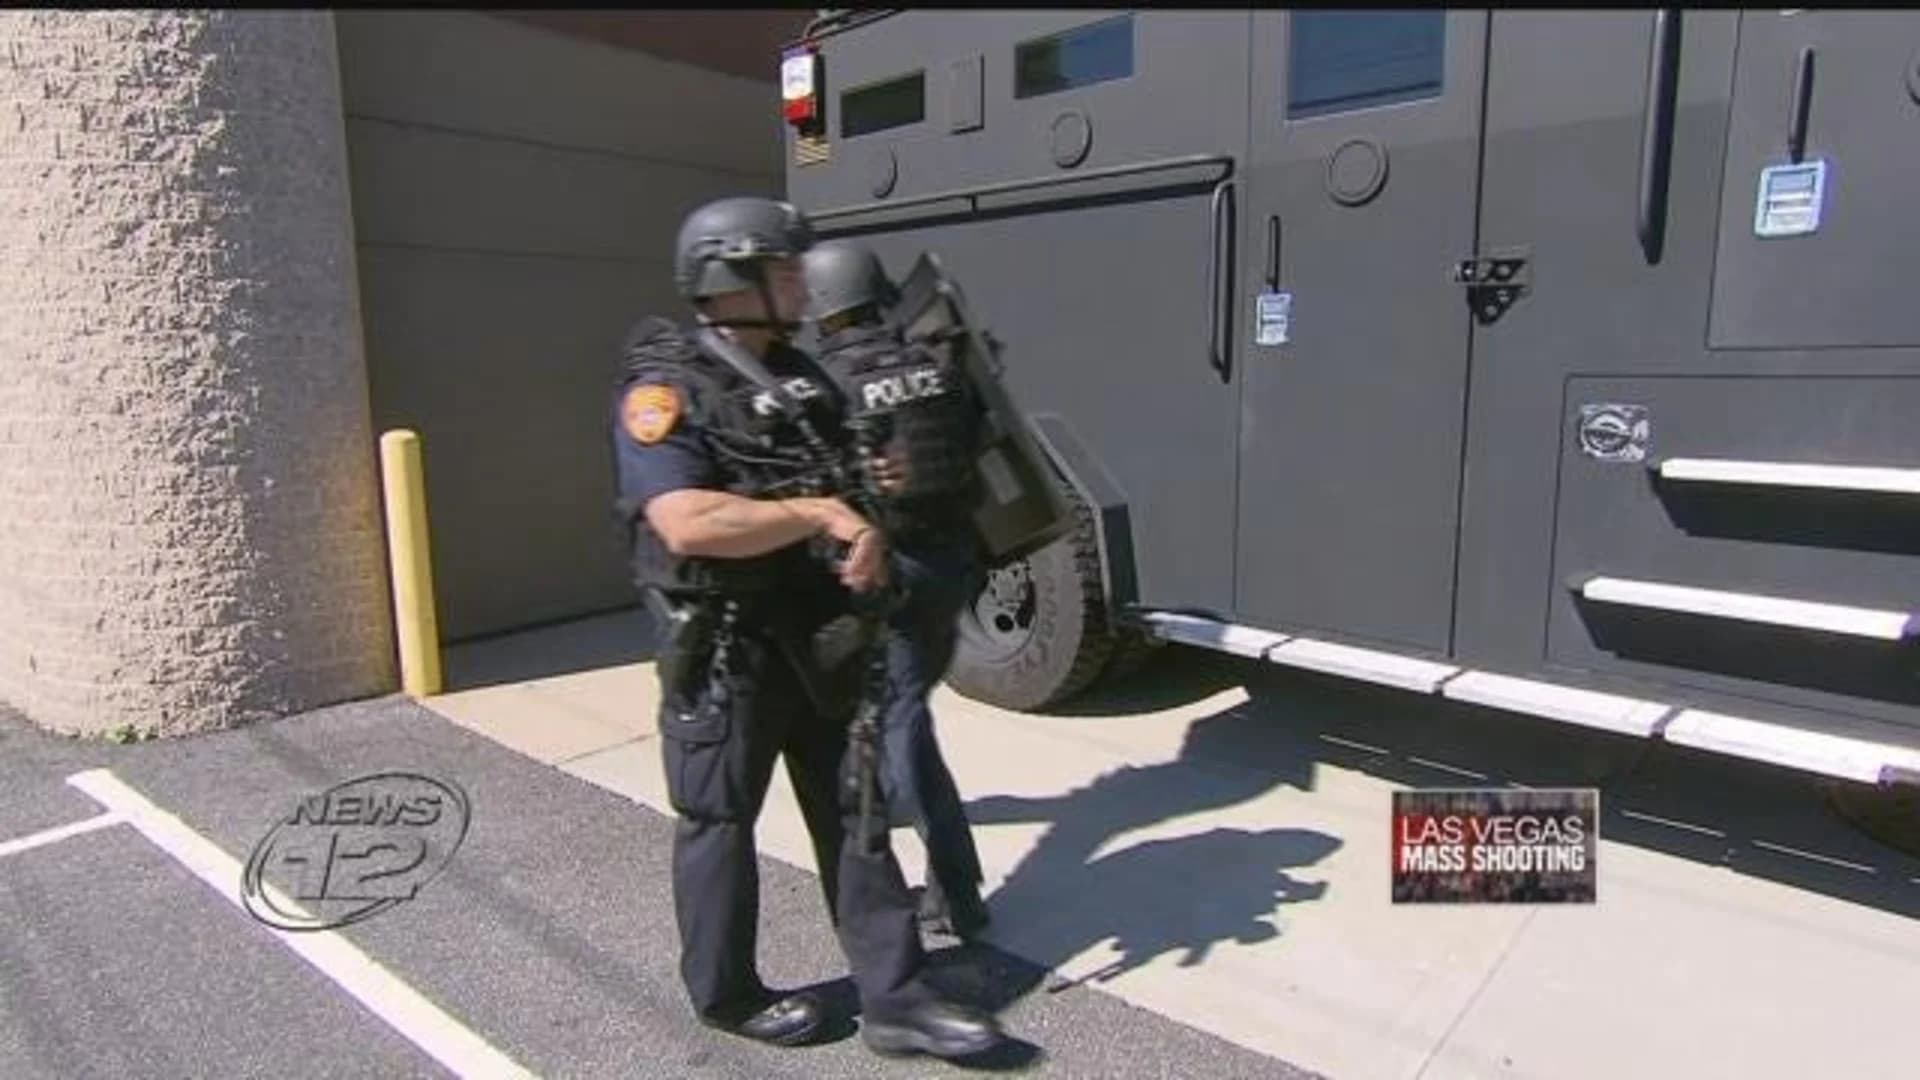 Police: No specific threats to LI, but officers are prepared